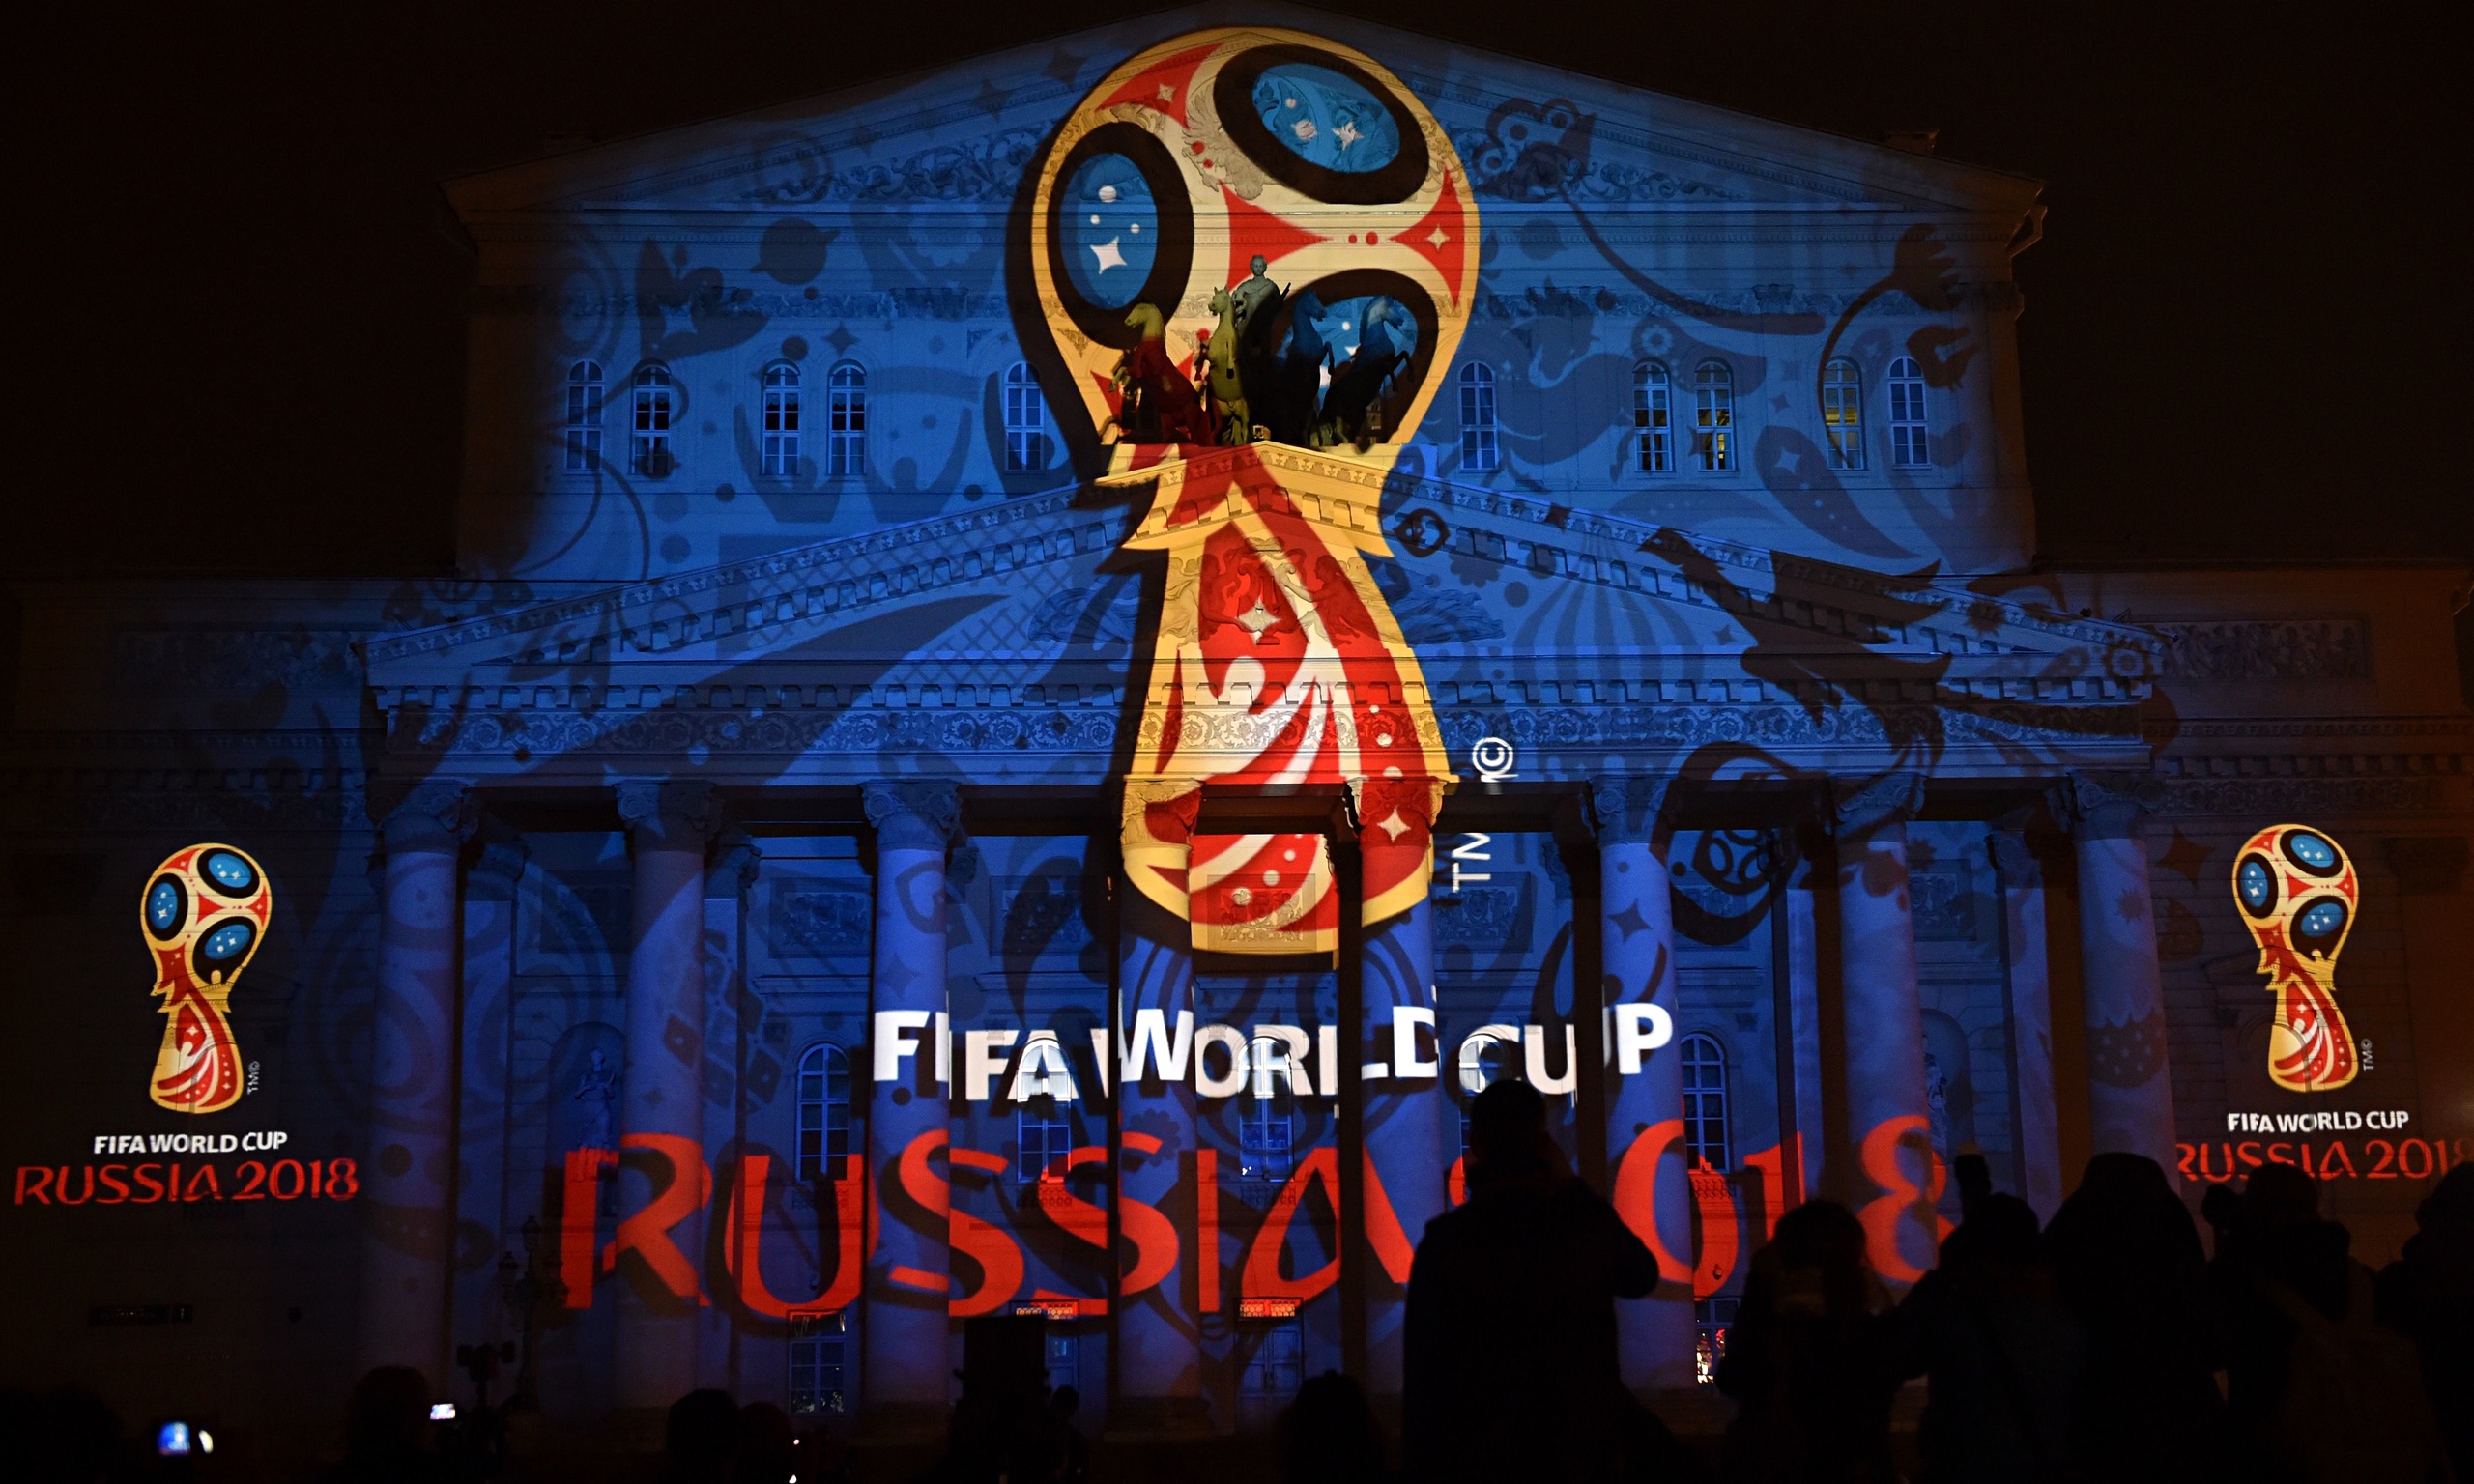 Russia 2018: Could the World Cup be Boycotted?